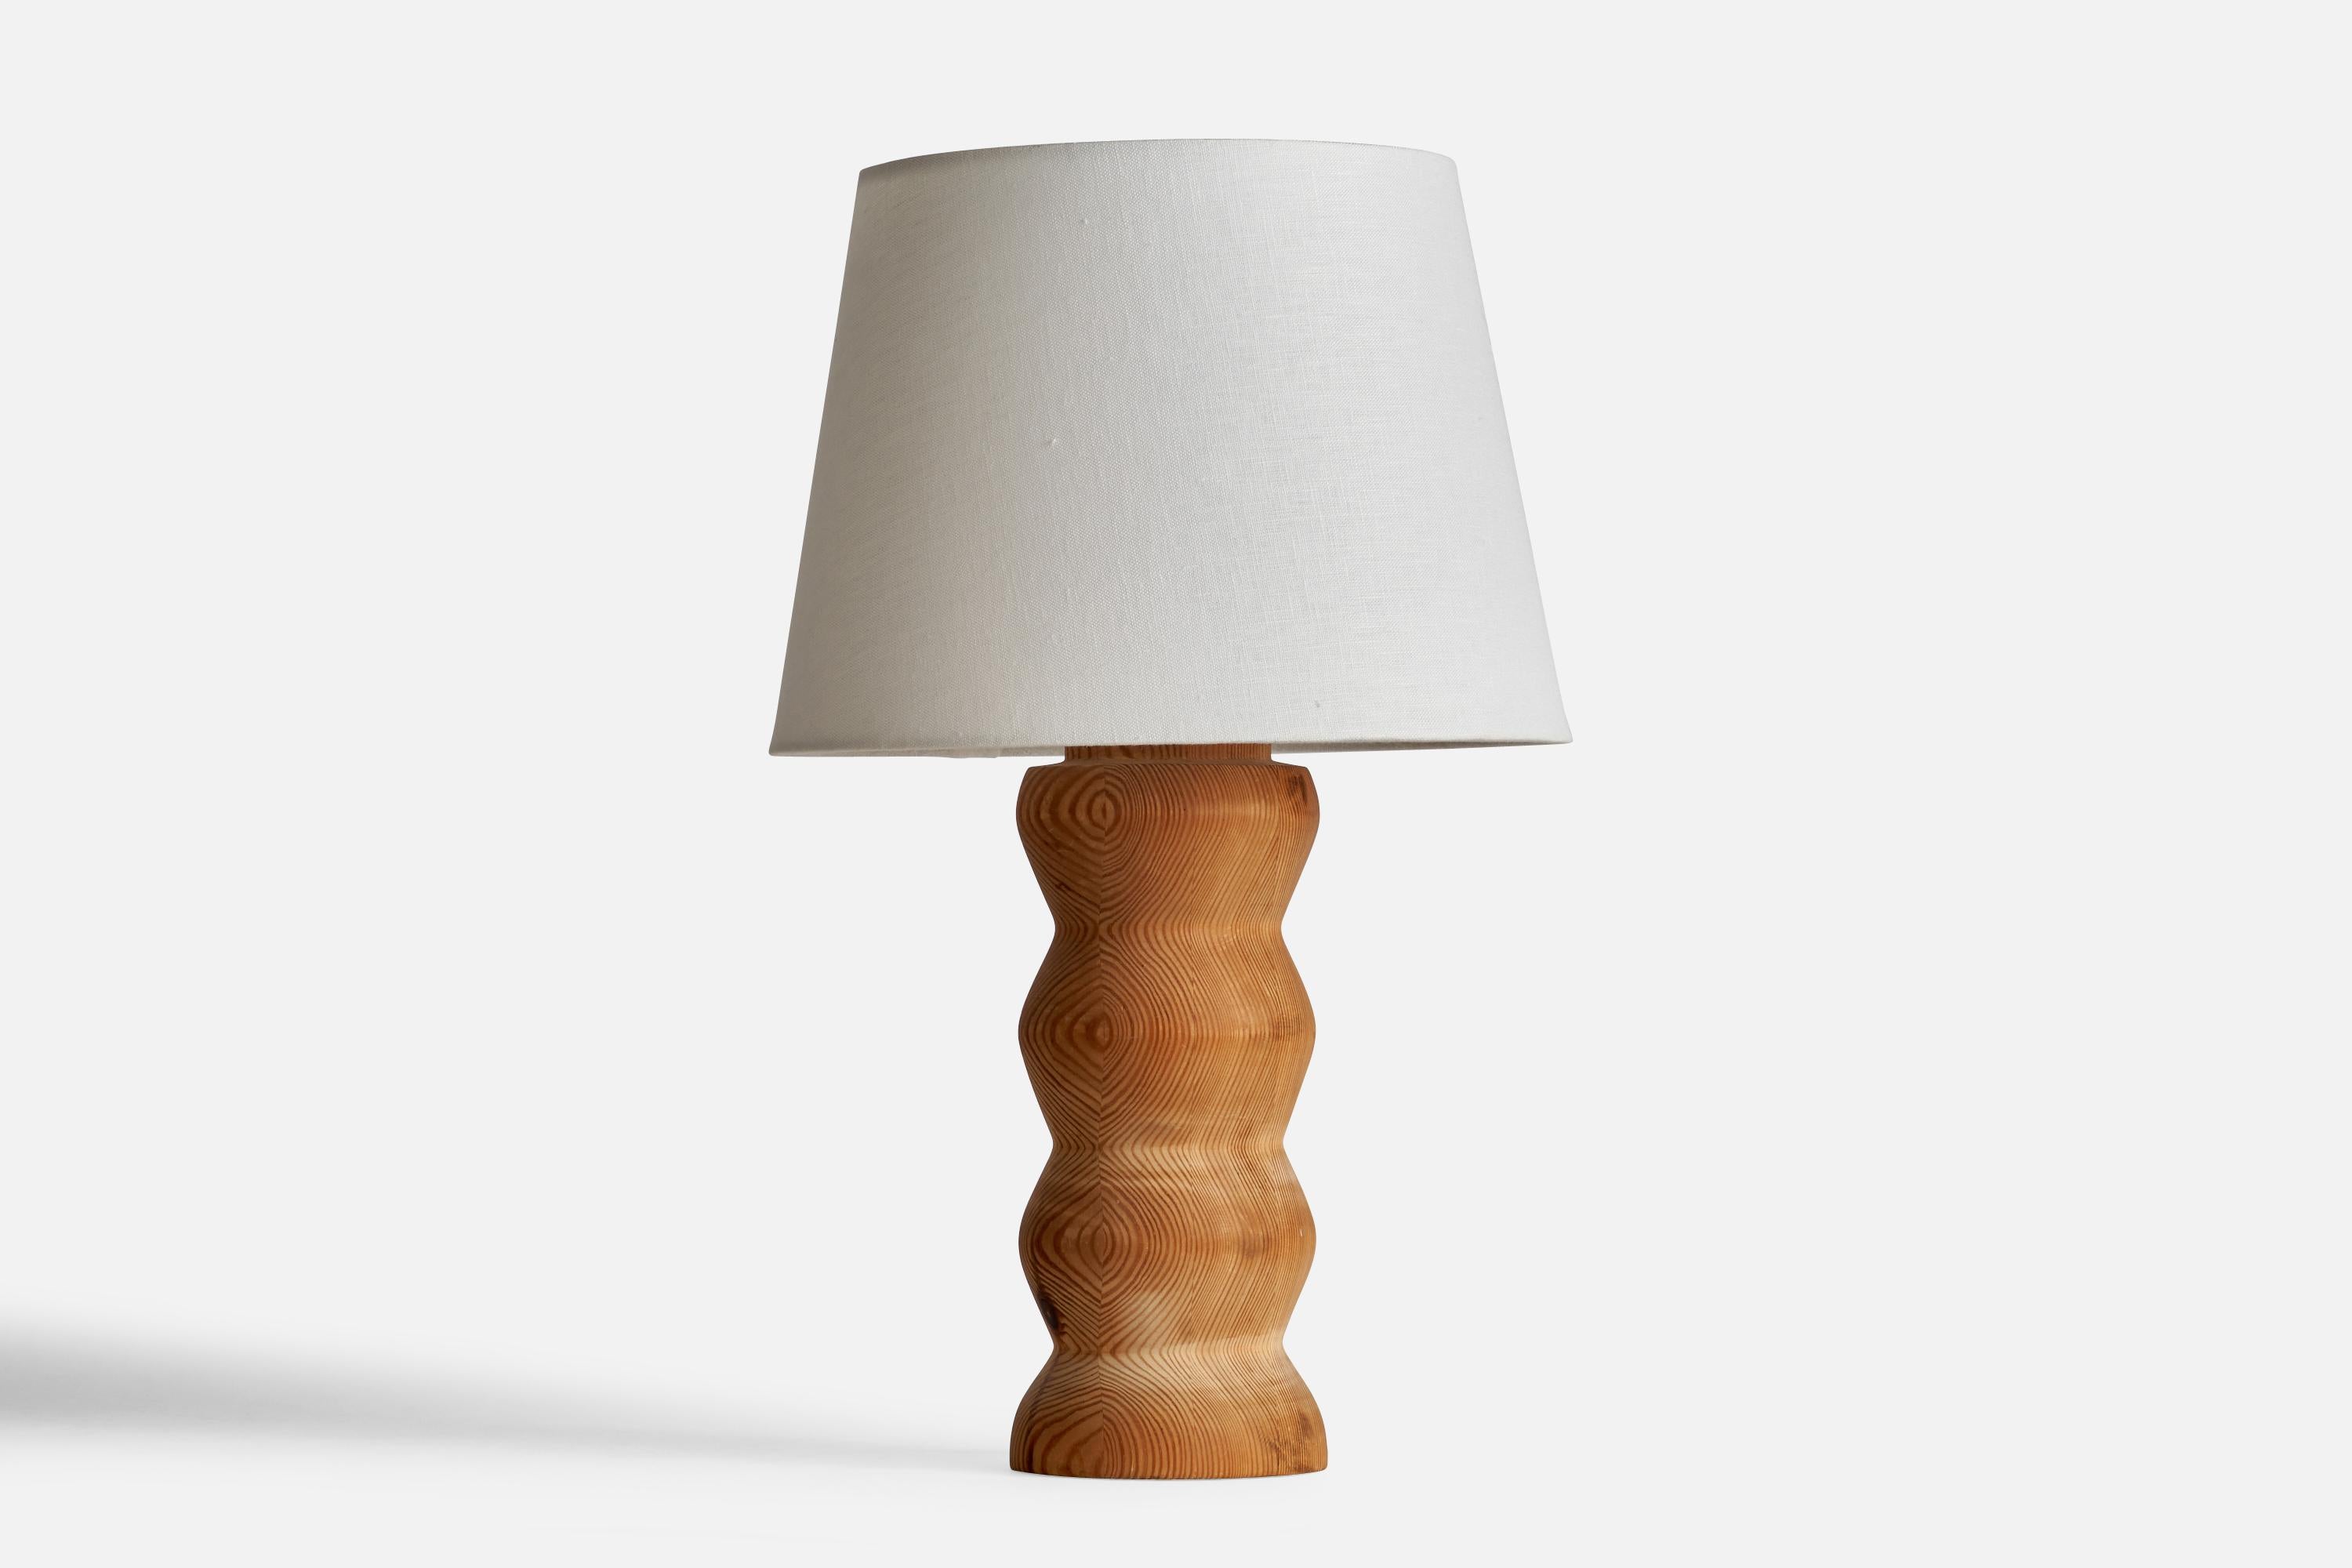 An organic pine table lamp designed and produced in Sweden, 1970s.

Dimensions of Lamp (inches): 14” H x 4.5”  Diameter
Dimensions of Shade (inches): 9” Top Diameter x 12”  Bottom Diameter x 8.75” H
Dimensions of Lamp with Shade (inches): 19.5” H x